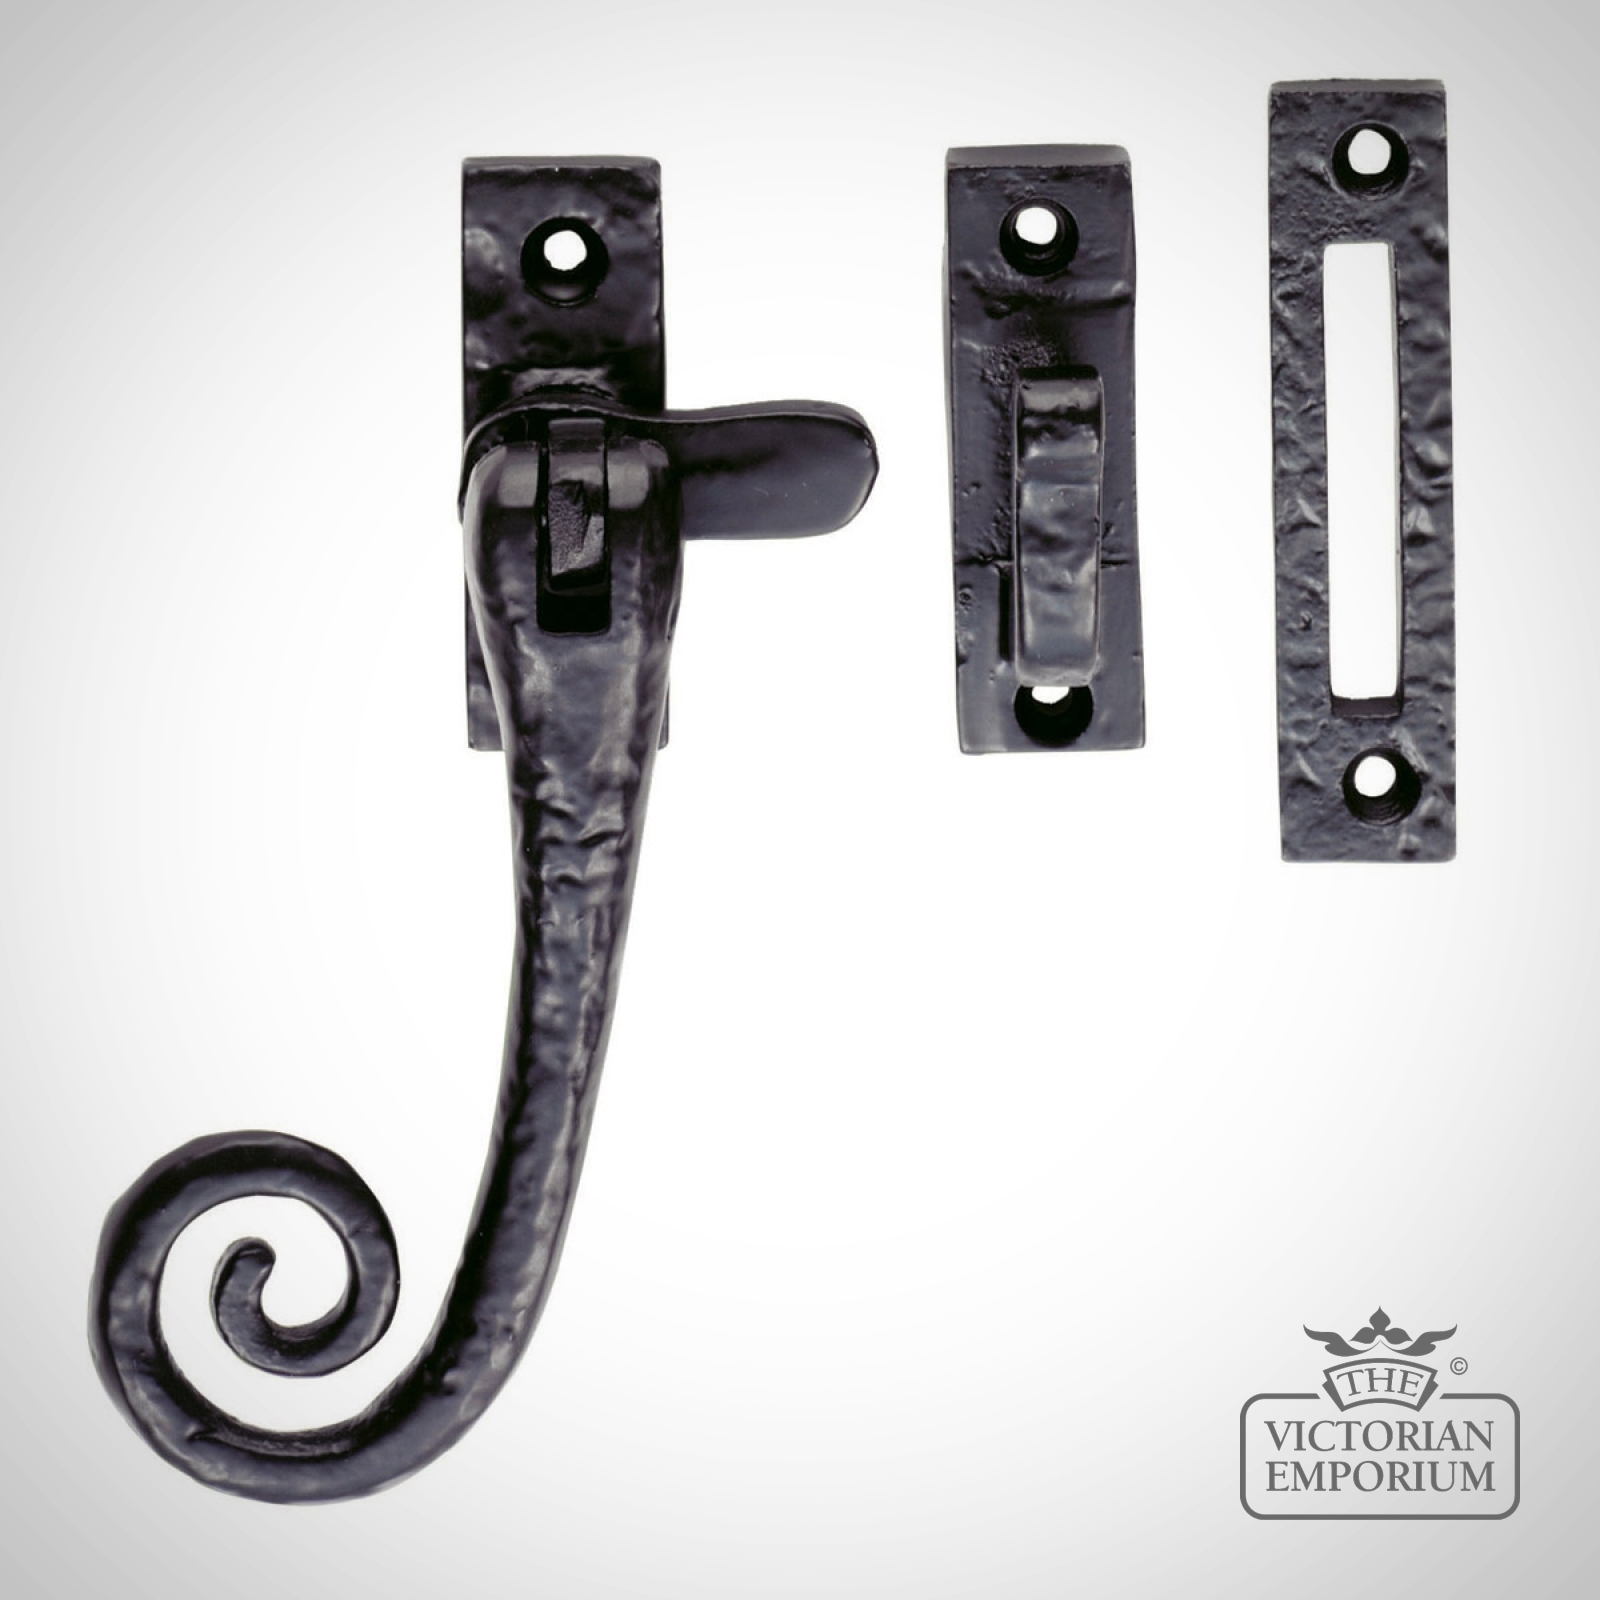 Curly tail casement fastener